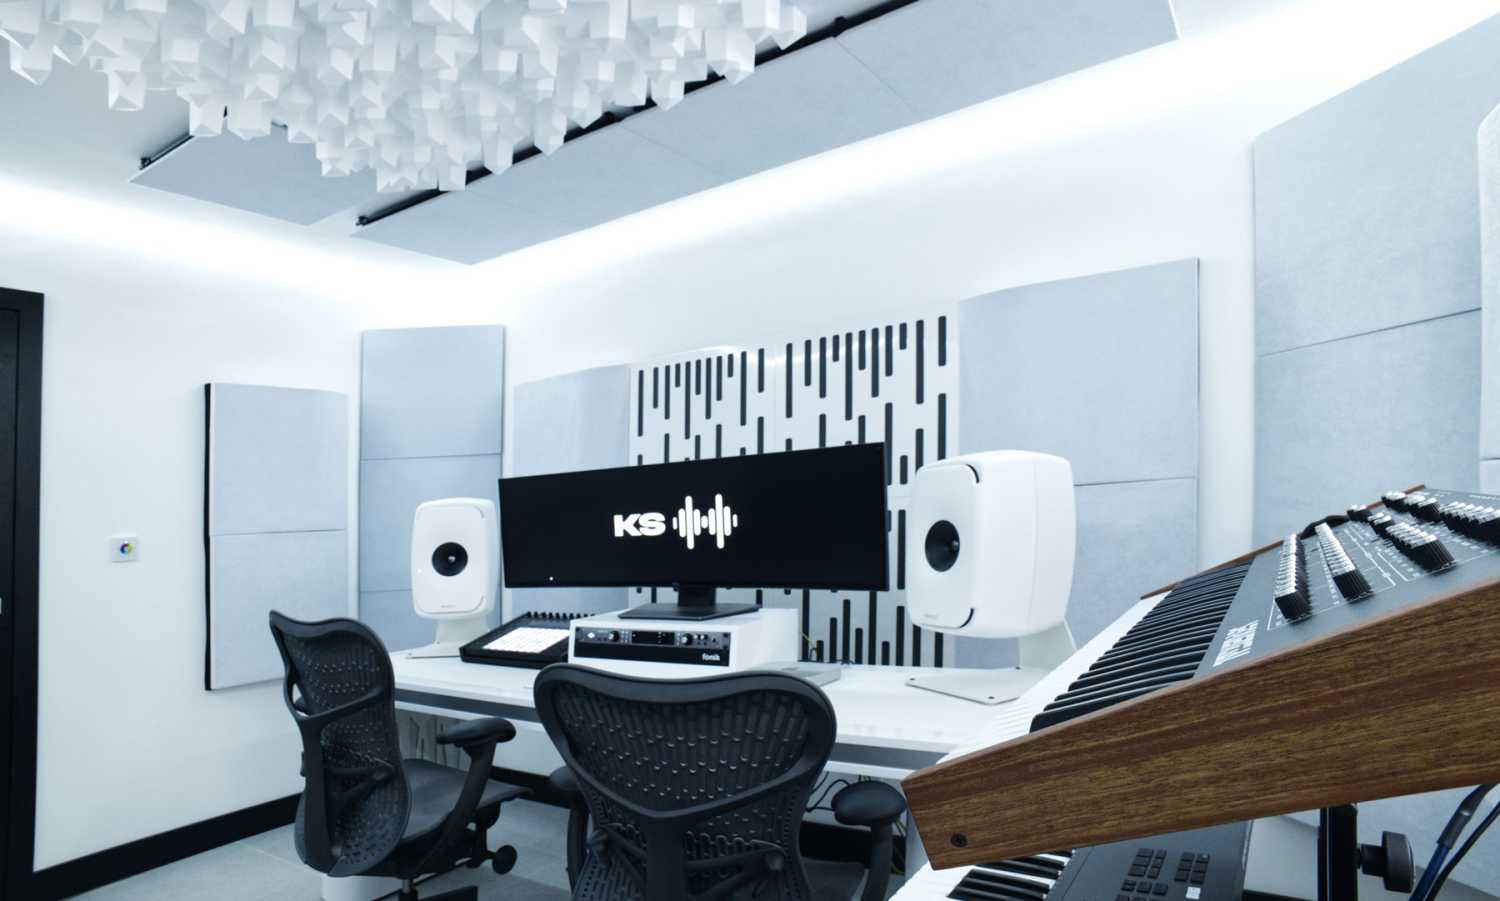 The studio’s three rooms all feature extensive sound treatment from Portuguese specialists Artnovion